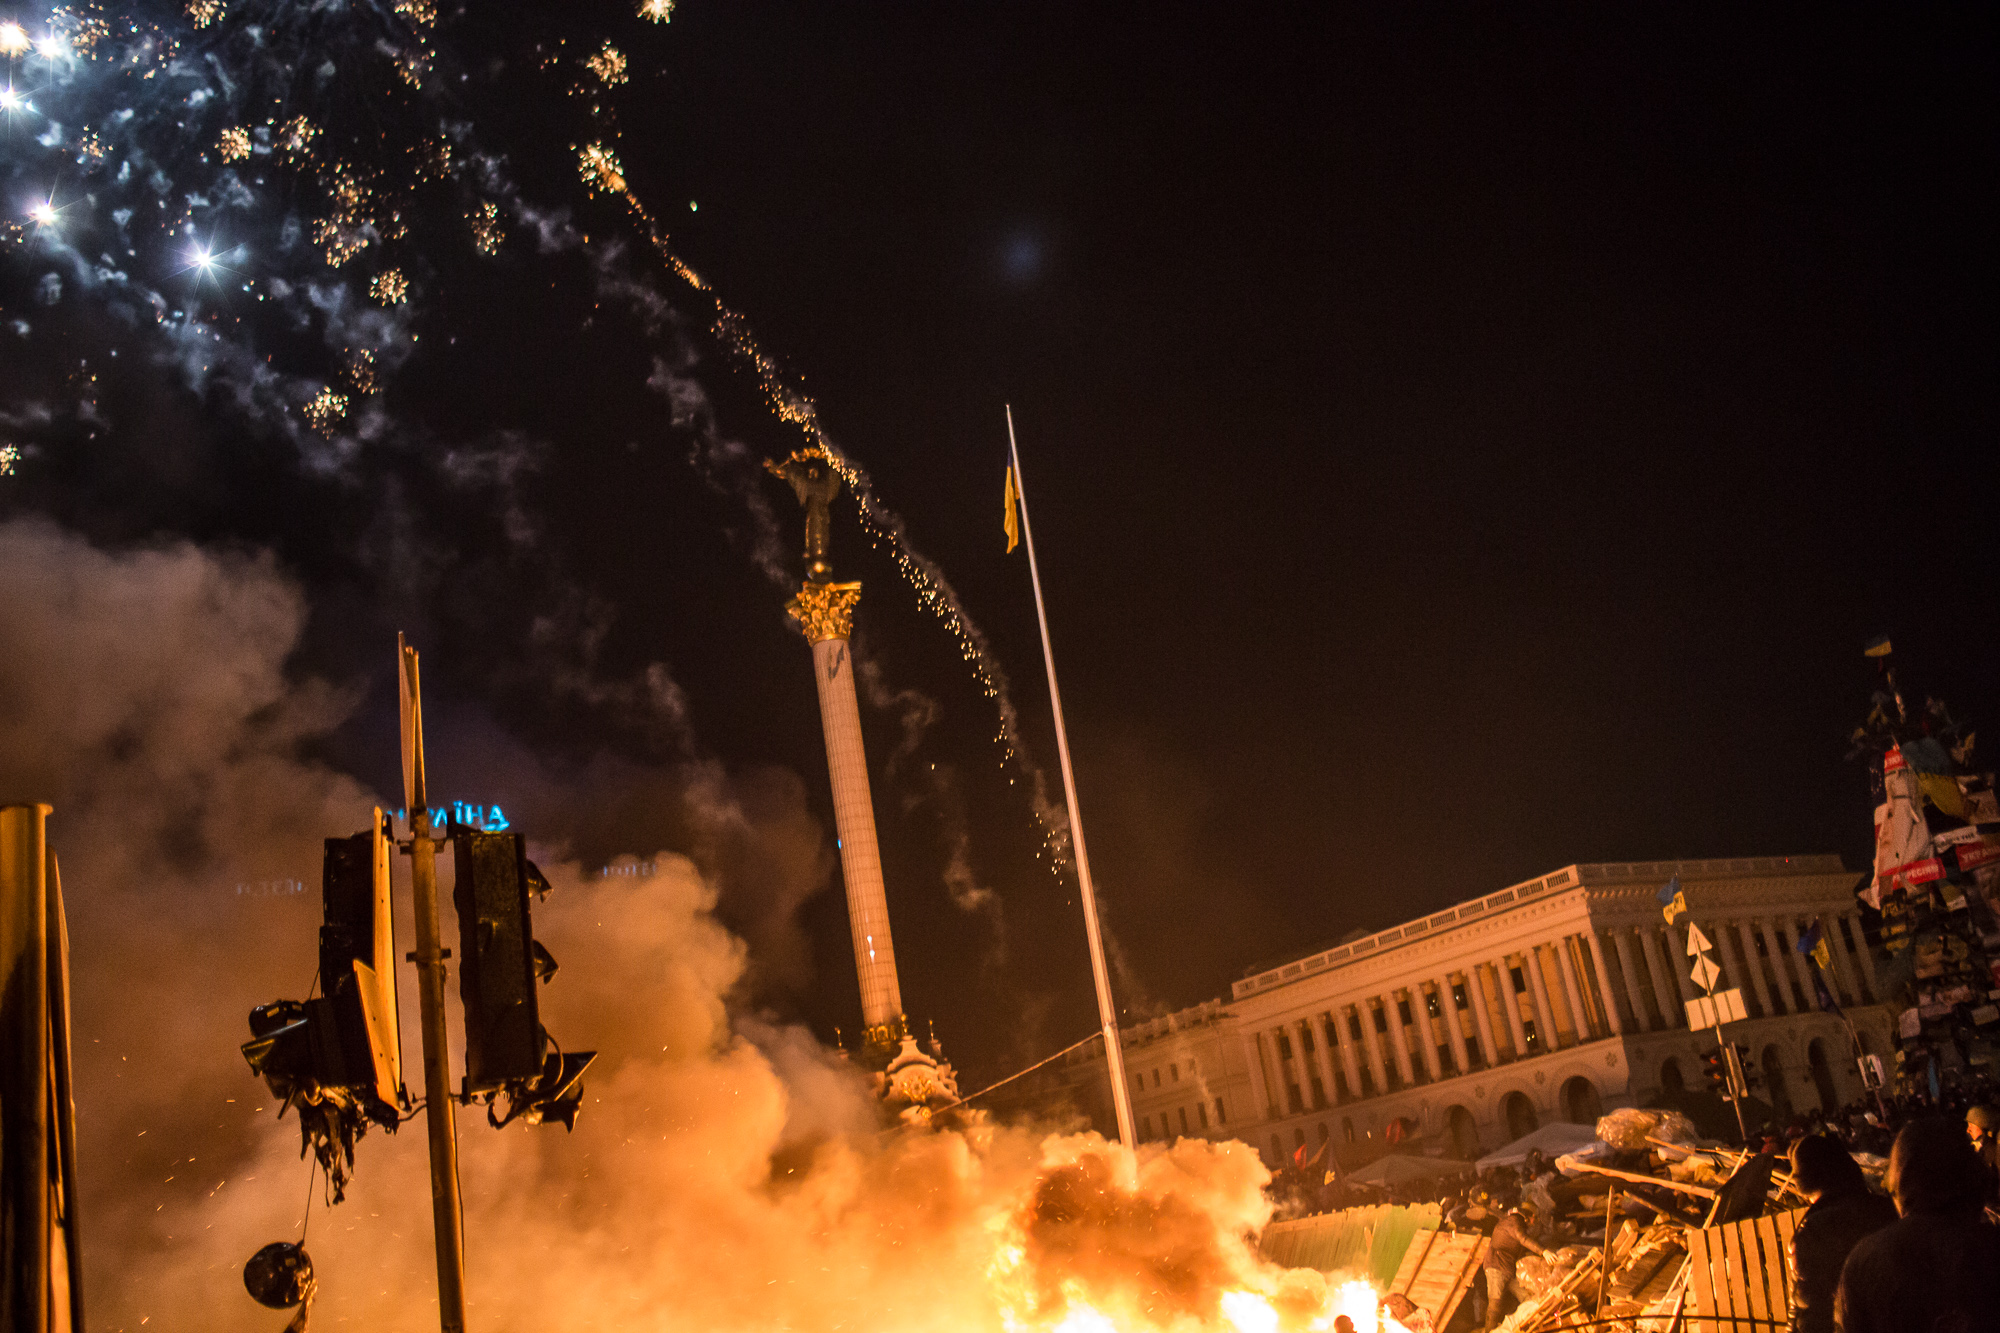  Fireworks fly over Independence Square, known as Maidan, during clashes in the early hours of on February 19, 2014 in Kiev, Ukraine. After several weeks of calm, violence has again flared between police and anti-government protesters, who are callin